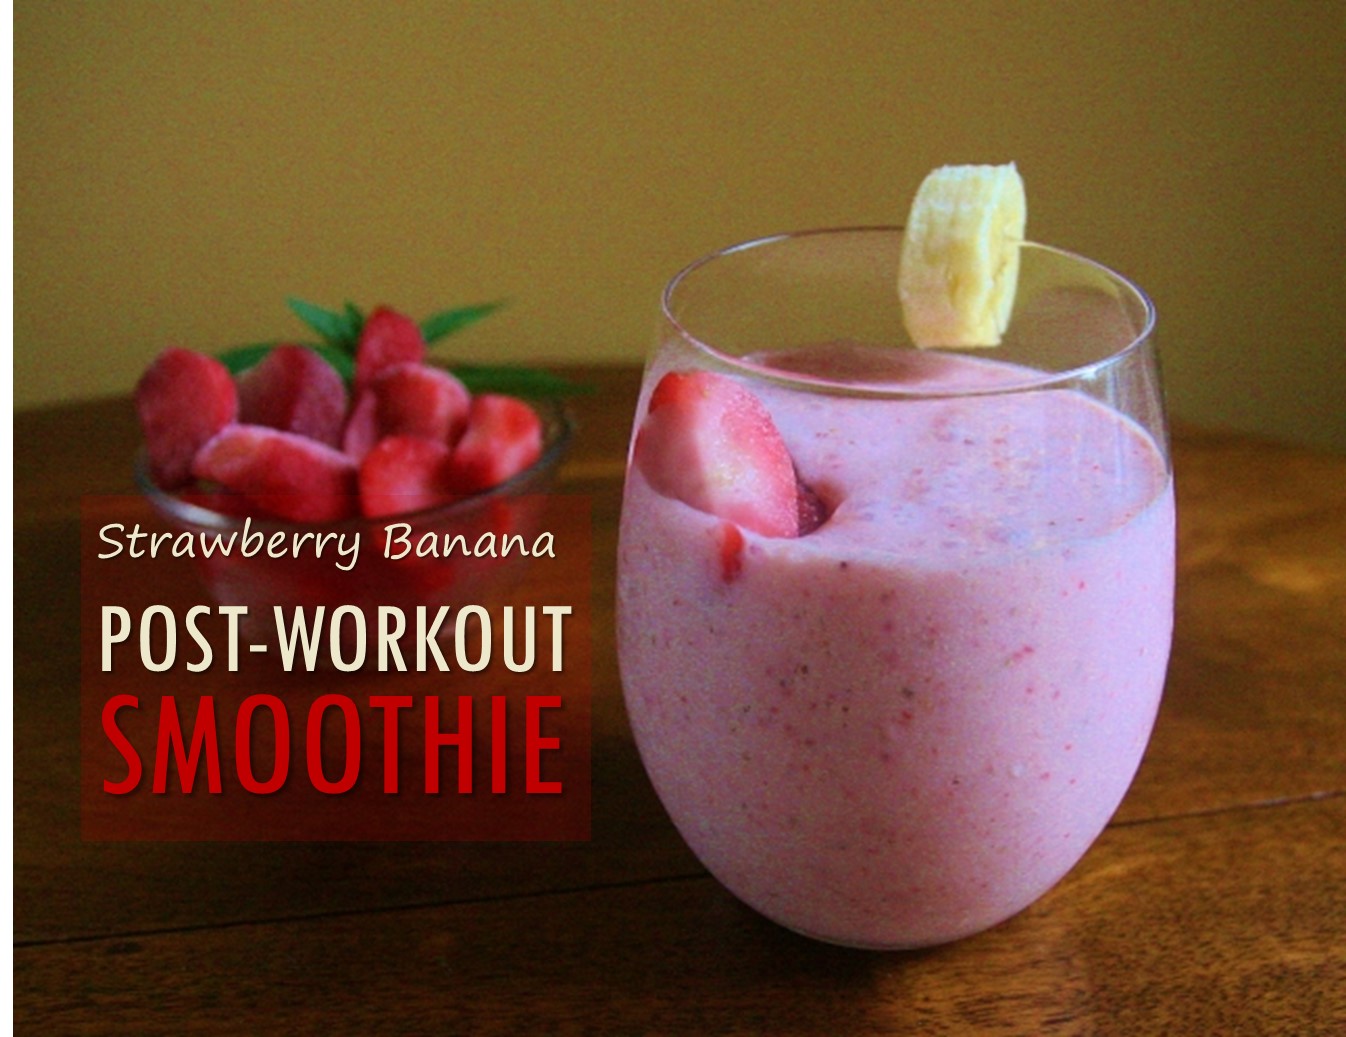 Workout Recovery Smoothie Recipe